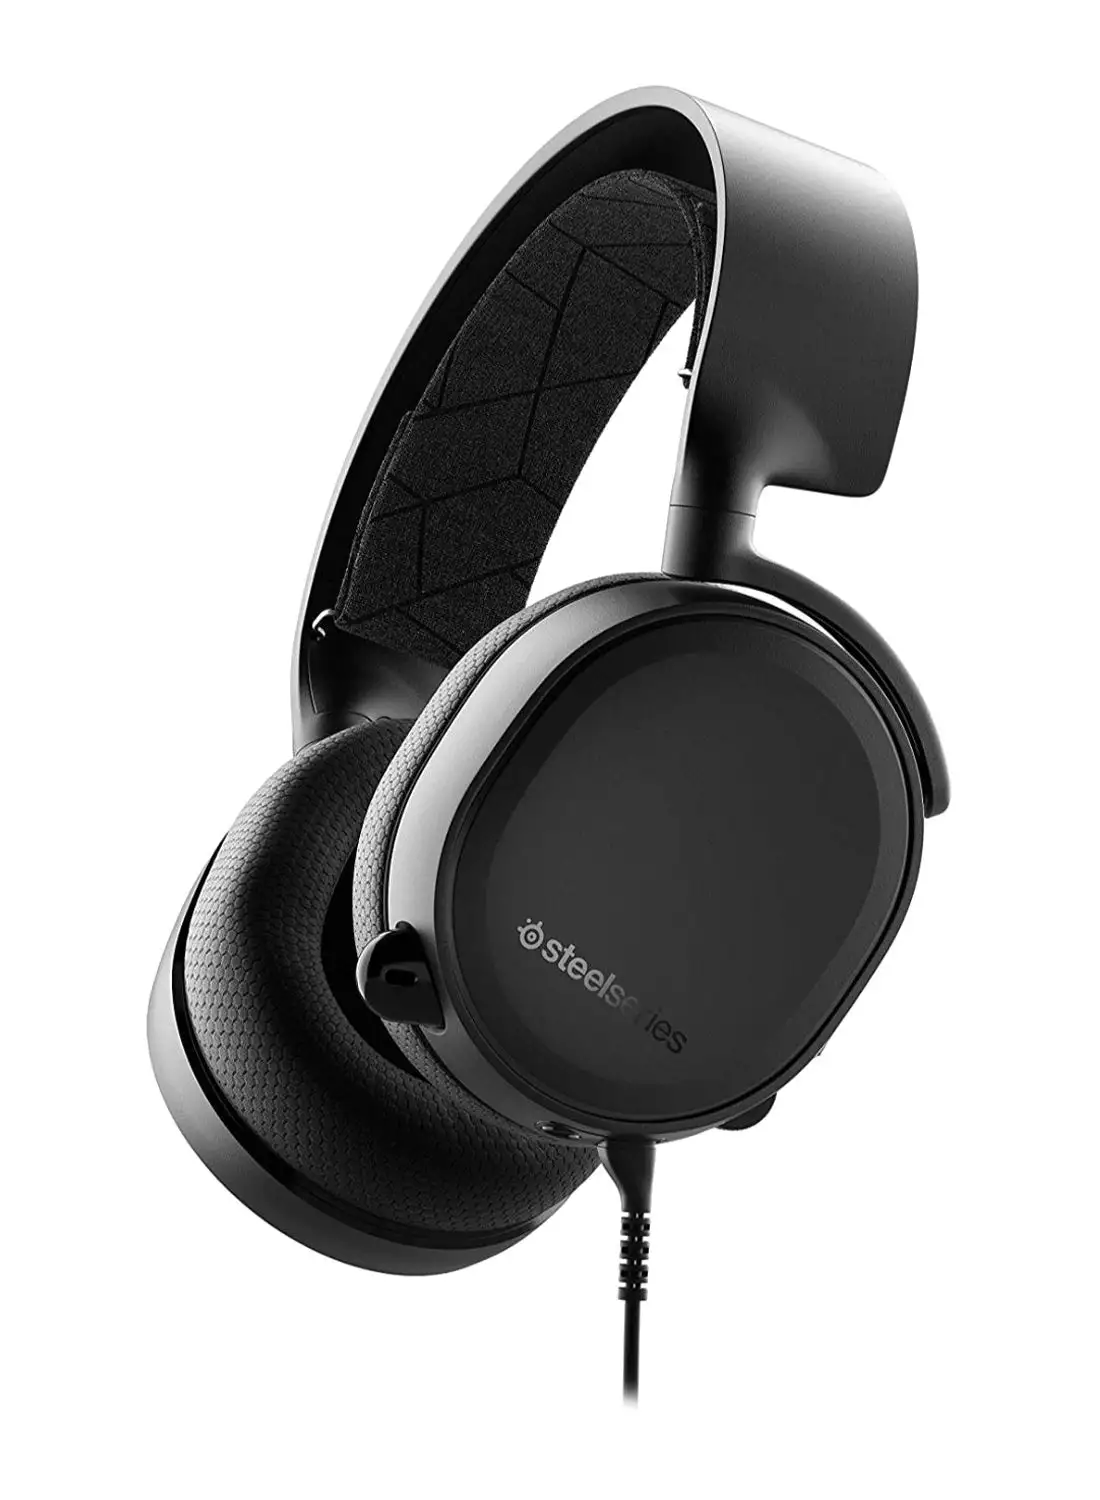 steelseries Arctis 3 (2019 Edition) Wired Black Gaming Headset For PlayStation 5 and PS4, Xbox, Nintendo Switch, VR, Mobile Gaming, and iOS